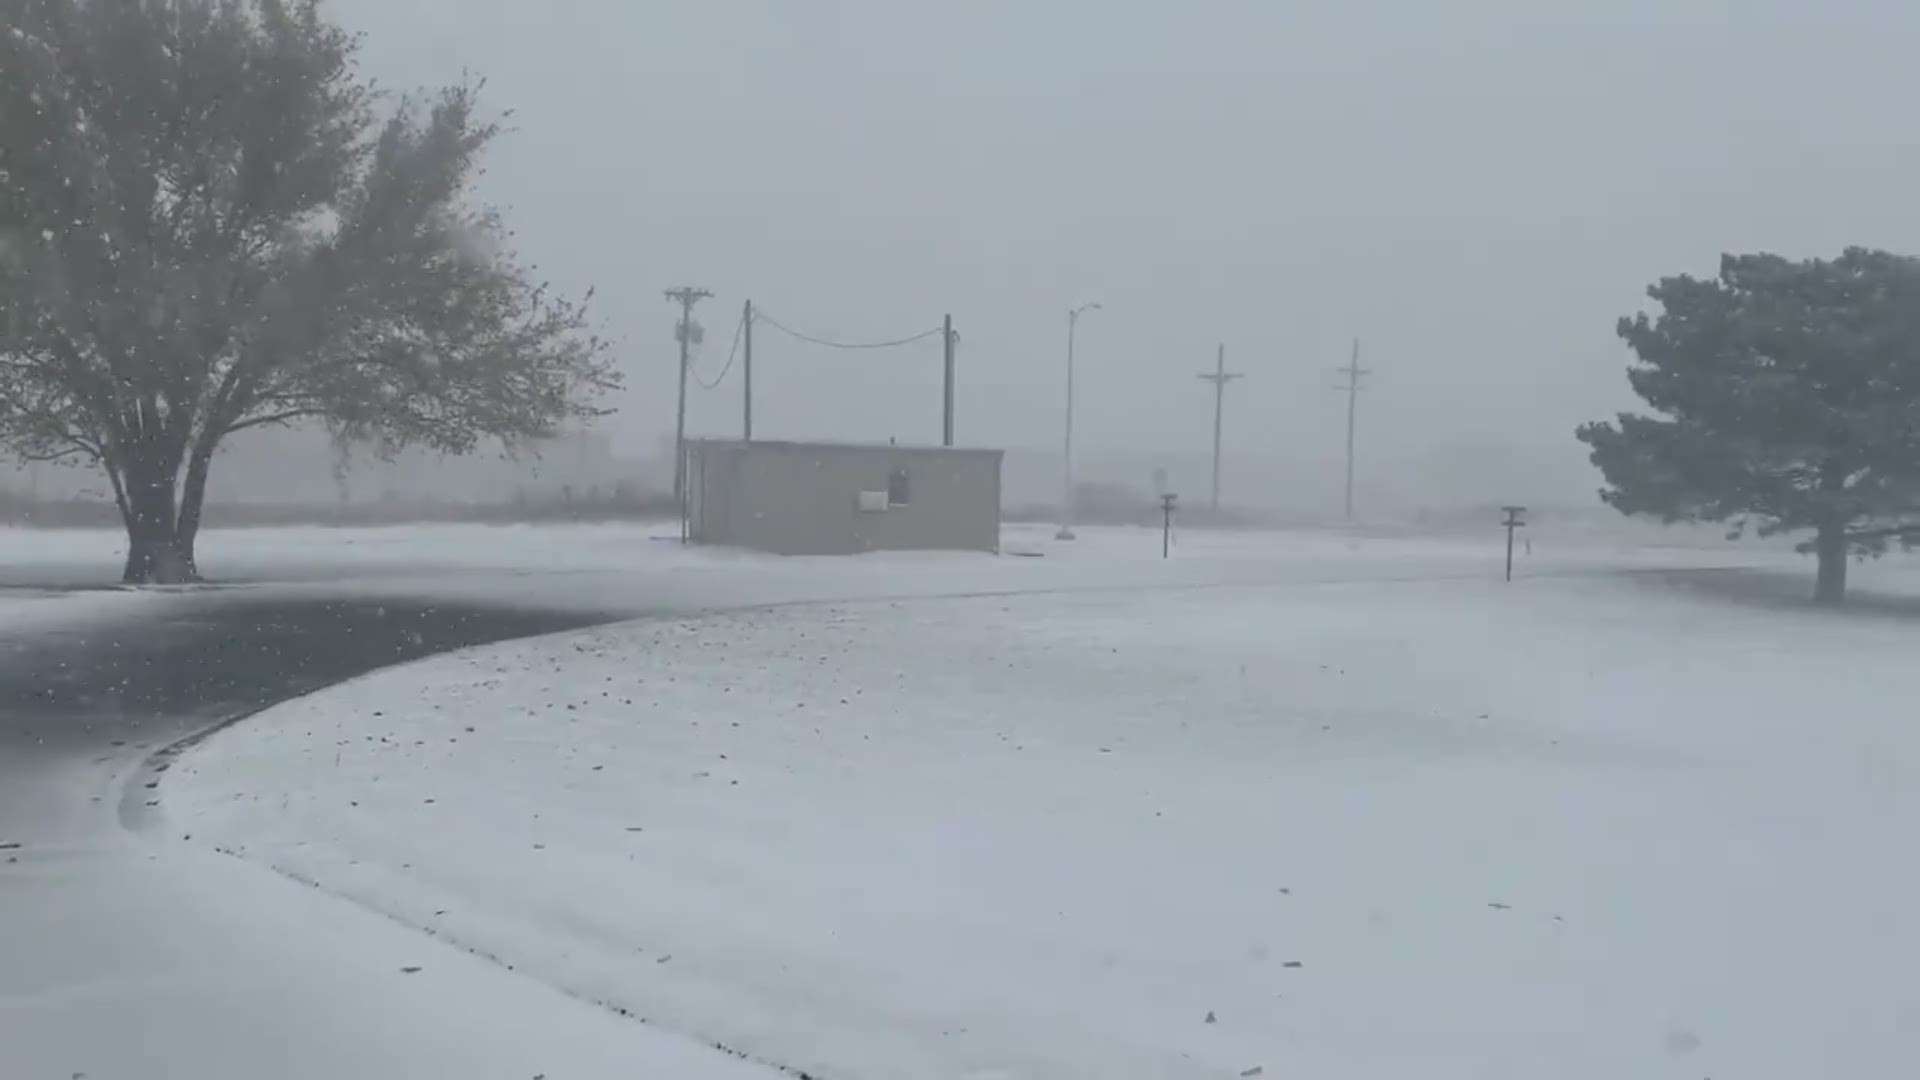 NWS reports blizzard-like conditions in Panhandle